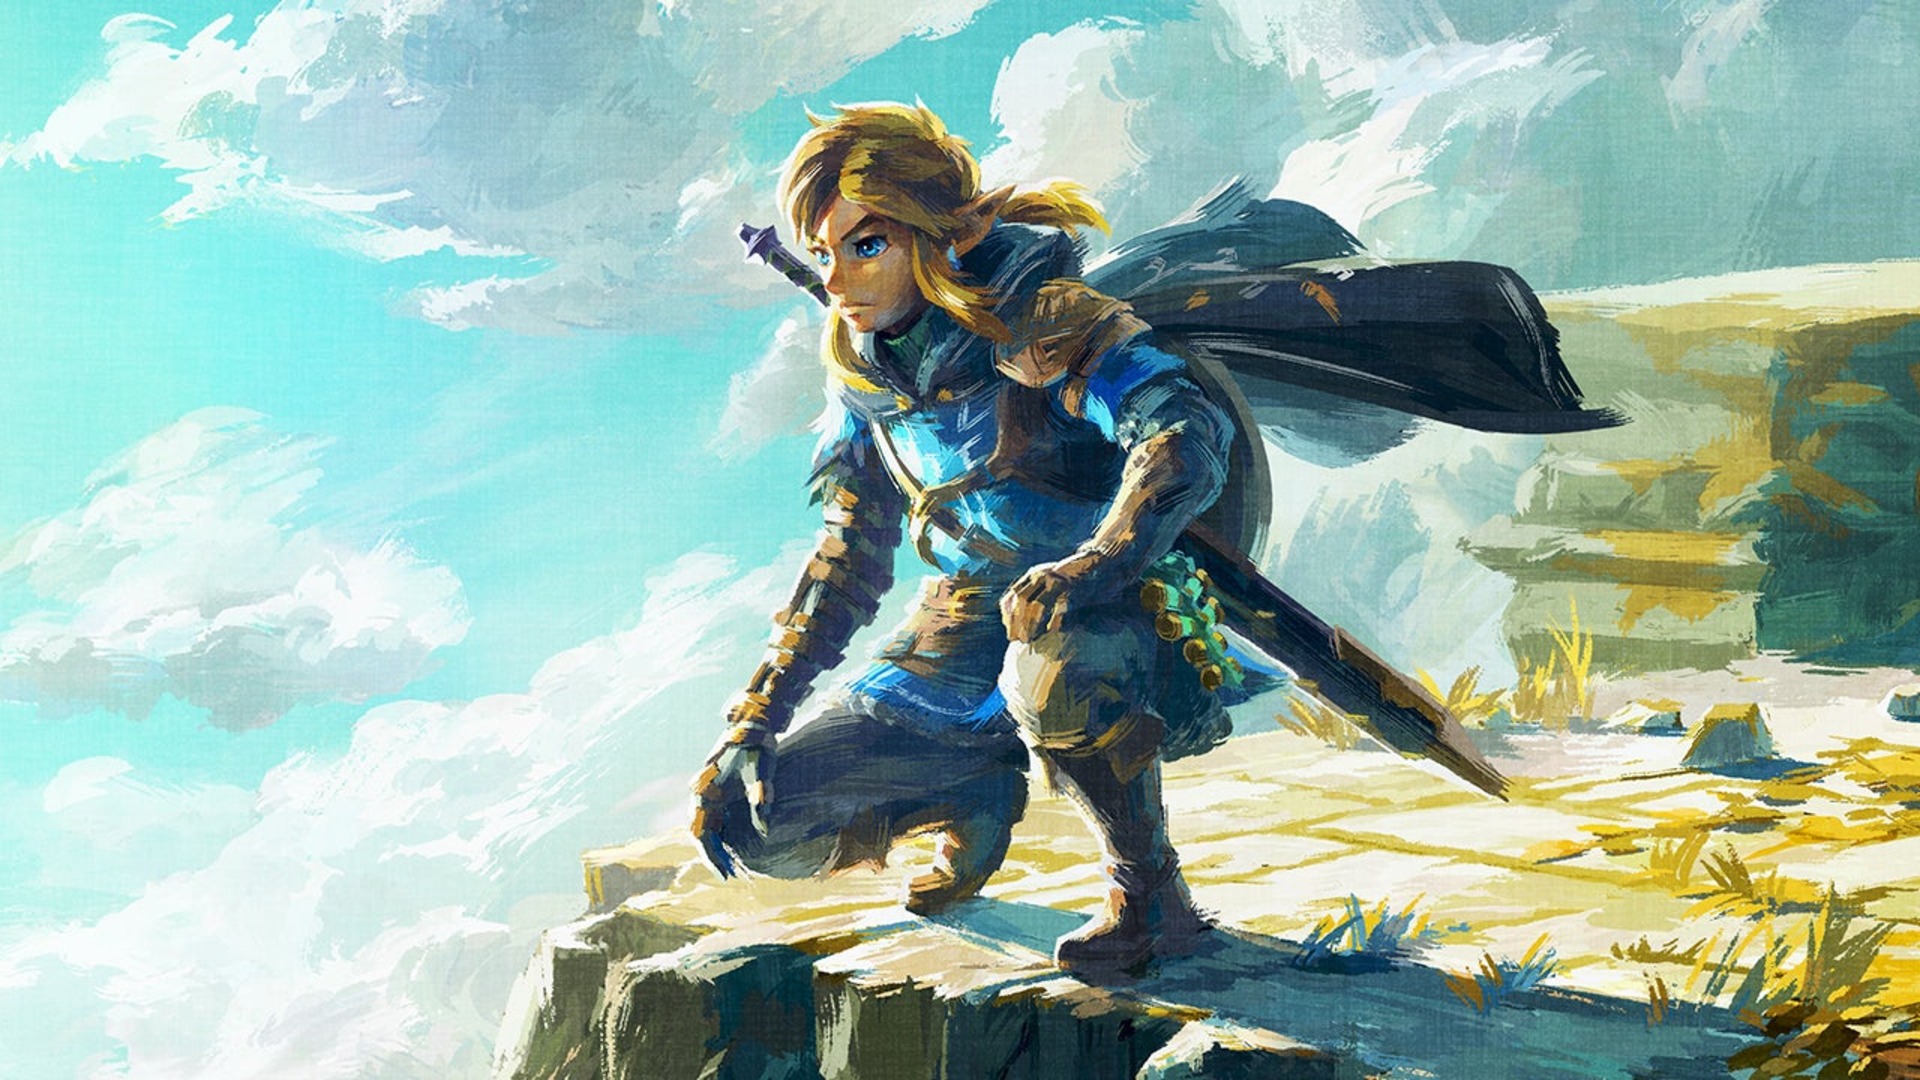 Best new game: Link from Zelda, kneeling on a plateau, looking forward